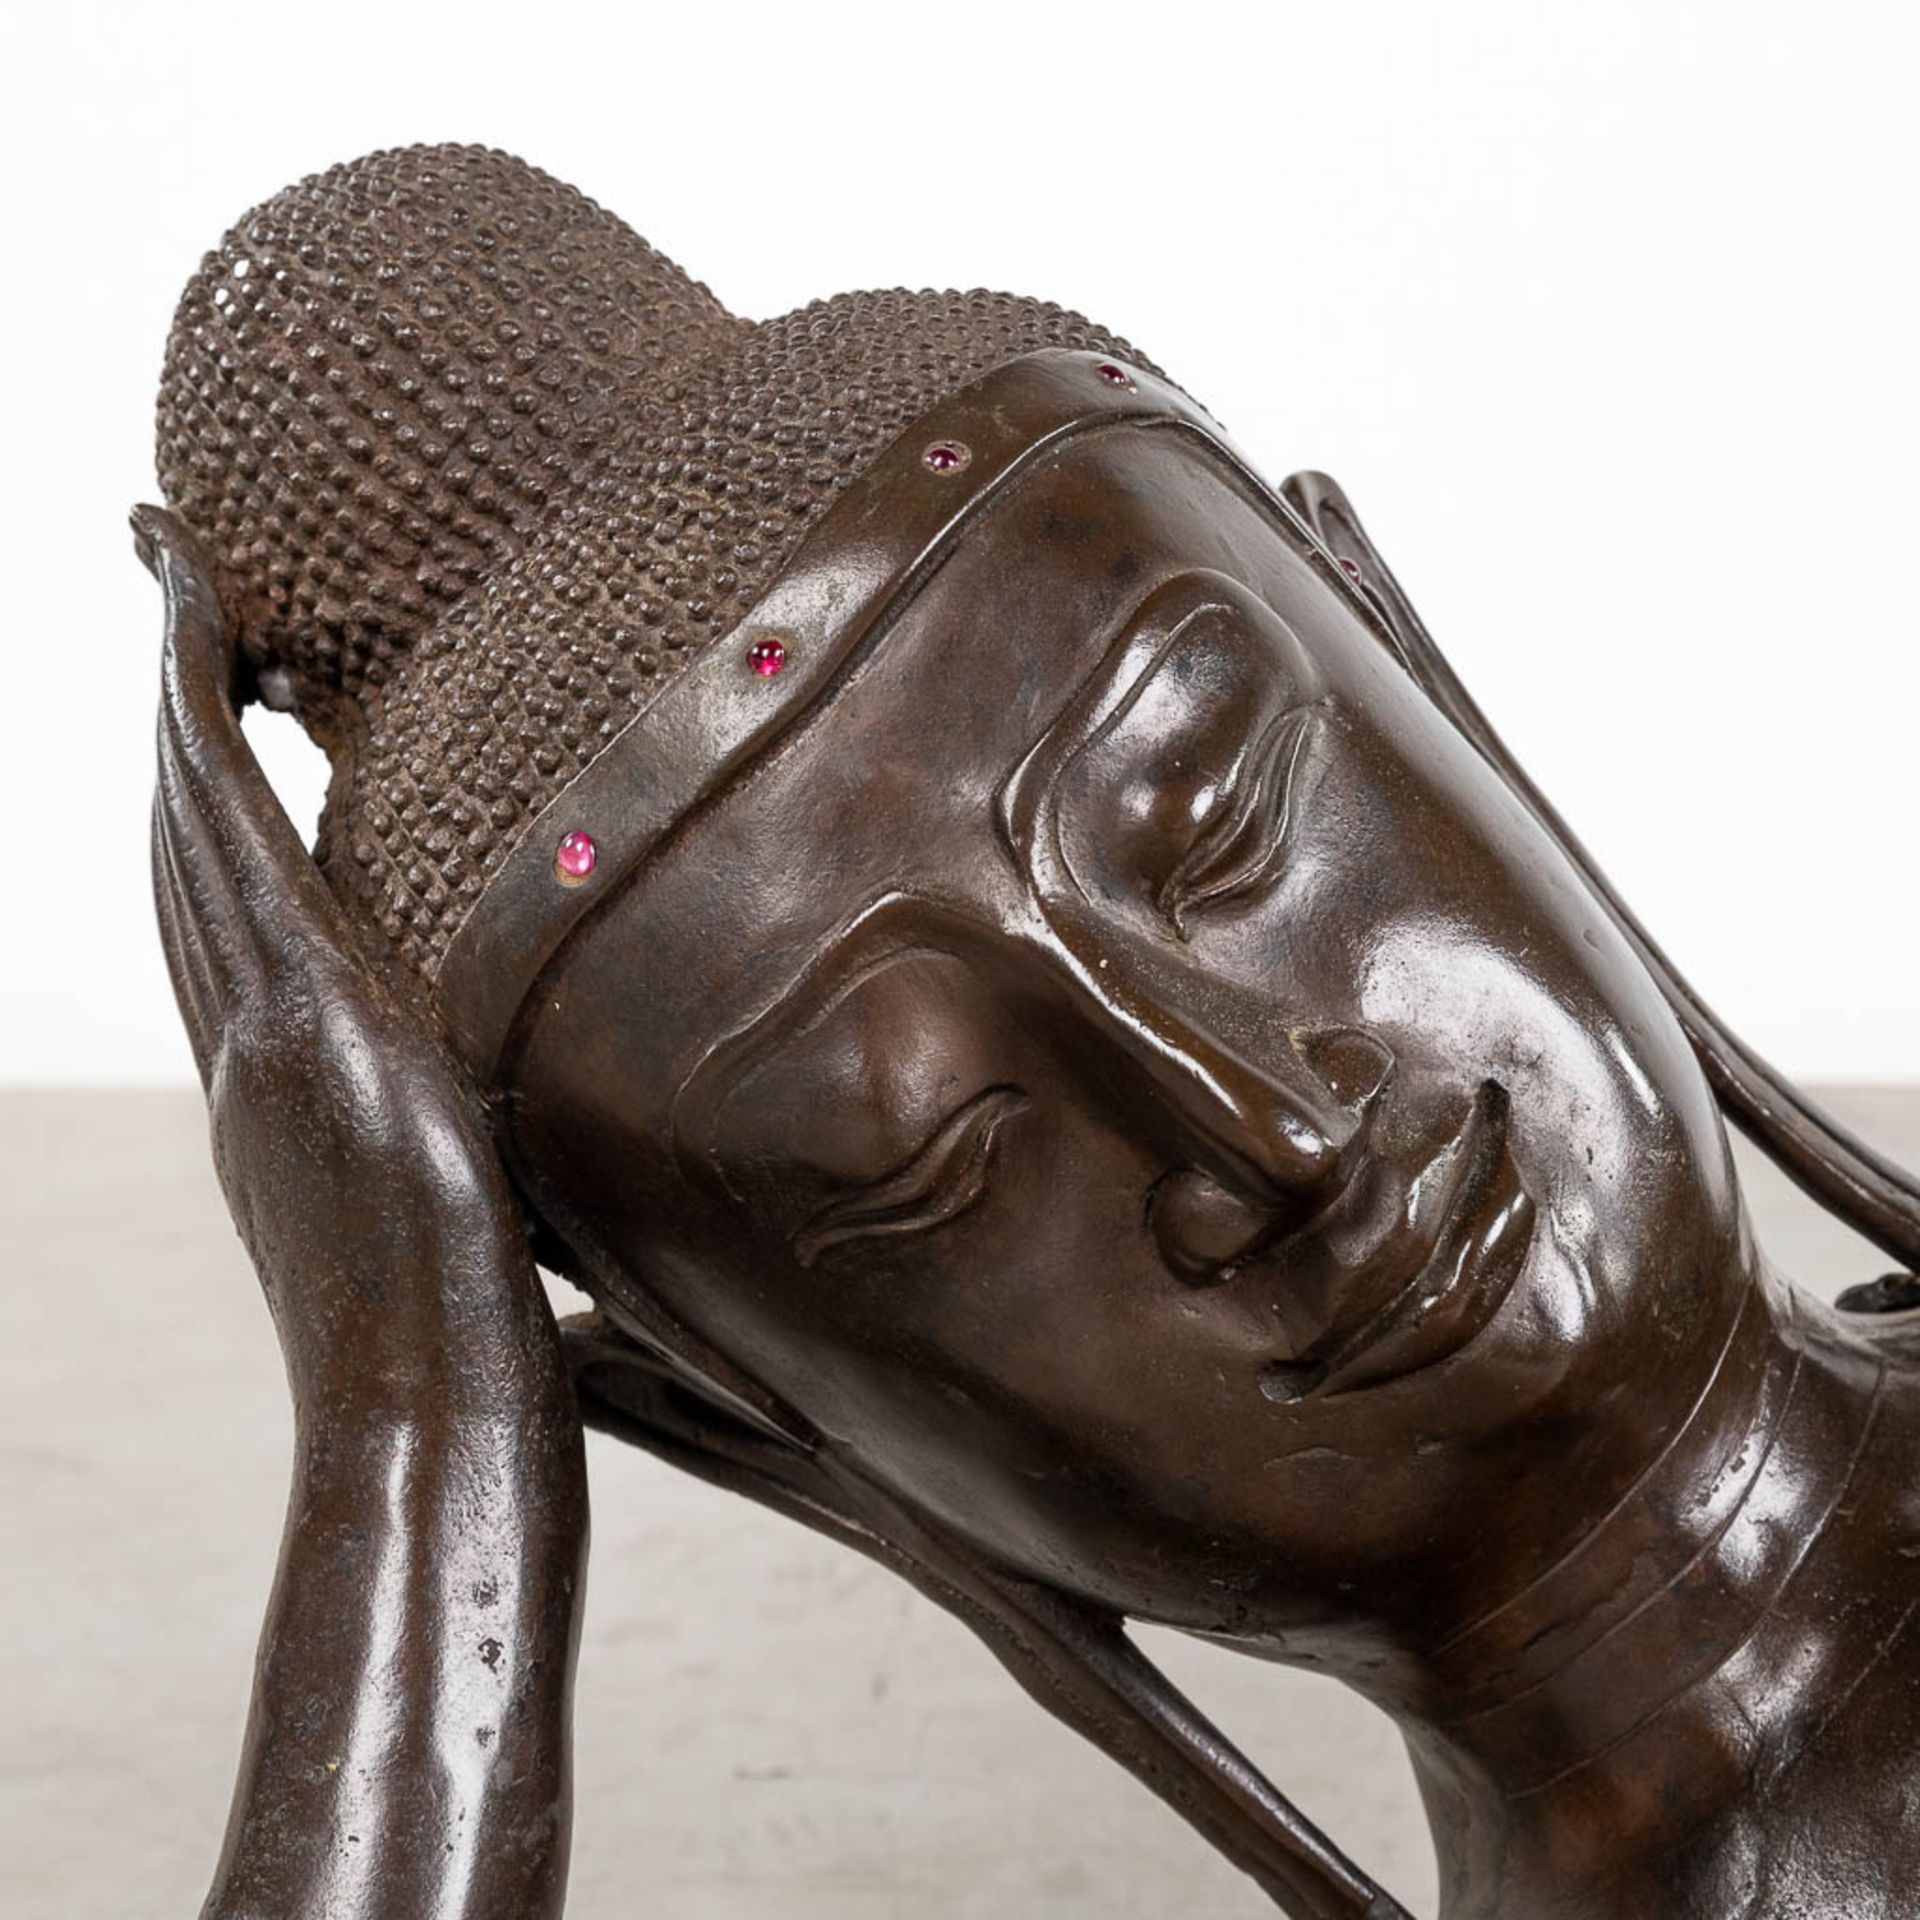 A large statue of a reclining buddha, patinated bronze. (L: 37 x W: 130 x H: 34 cm) - Image 9 of 15